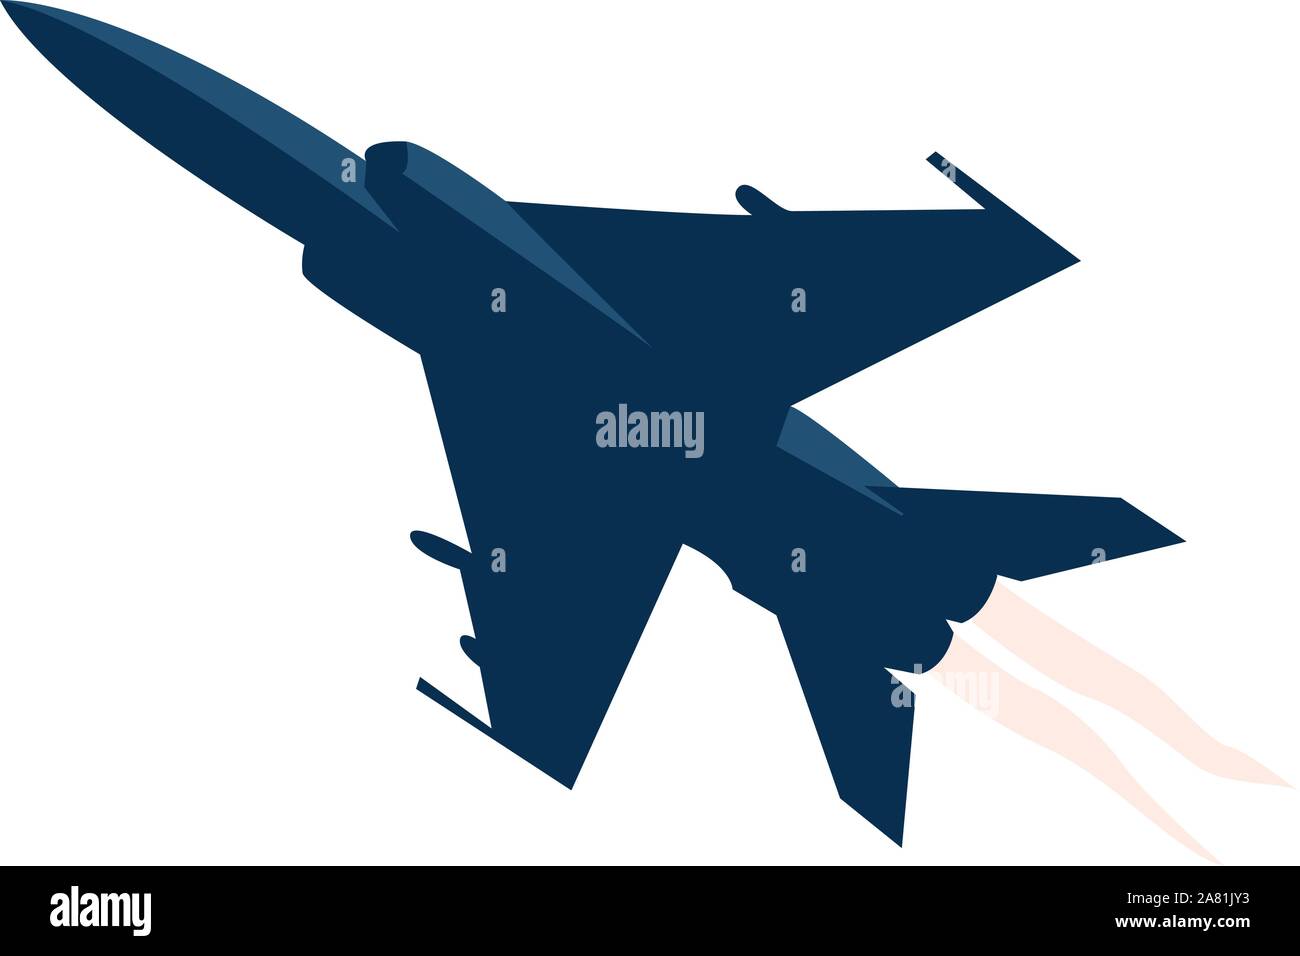 Fighter aircraft, illustration, vector on white background. Stock Vector